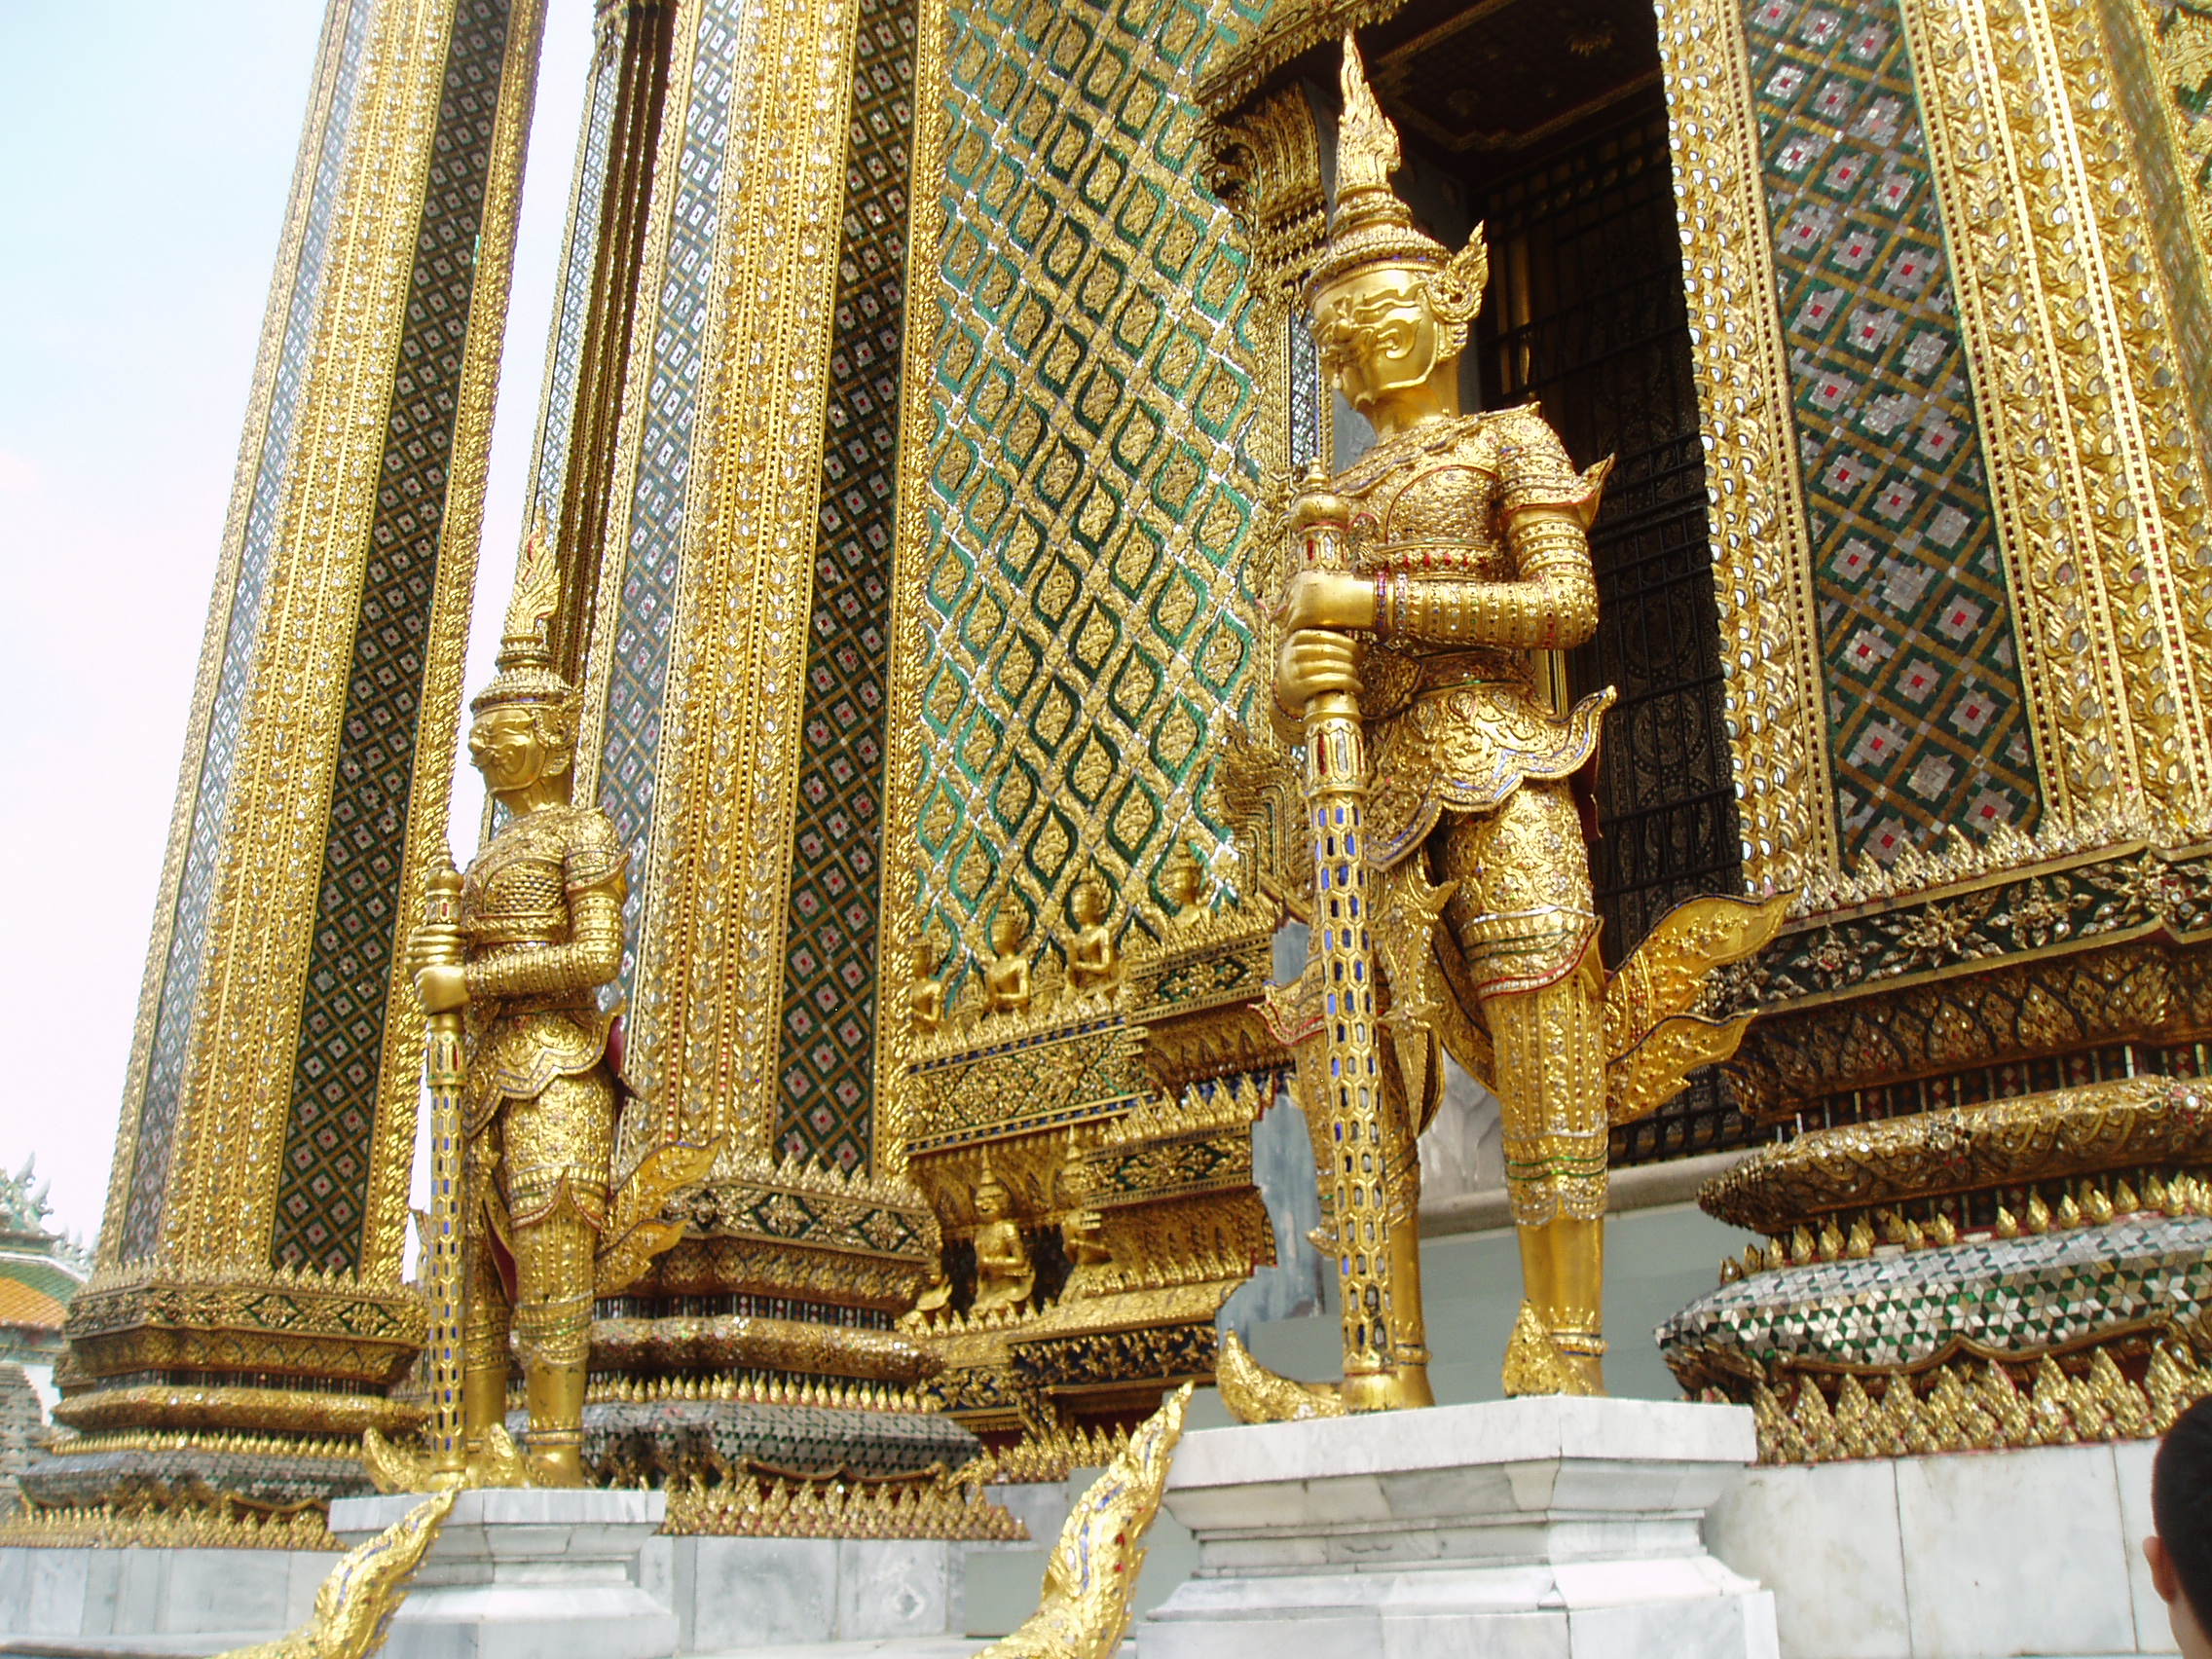 Golden Guardians, Wat Phra Kaew, Bangkok Bangkok's most unmissable attraction is of course the Grand Palace, and most specifically the temple complex of Wat Phra Kaew (Temple of the Emerald Buddha), famed for it's riot of coloured and gilded ornament, paintings and sculptures; quite simply, so visually stunning there is nothing quite like it anywhere else! The Palace and Temple complex were begun in 1782, the year the capital was moved to Bangkok, and parts of the palace buildings betray 18th century European influence combined with traditional Thai style, such as the breathtaking gilt spires on the roof. Most of the interiors of the Palace itself are off limits to visitors since, although no longer the main residence of the thai monarchy, it is frequently used for state functions and ceremonies. The Wat Phra Kaew complex however is the greatest draw, famed for it's stunning architecture and the famous 'Yaksha' guardian figures that flank all the main entrances to the complex. These towering figures, with their rich colours and tapering crowns, represent demonic characters from the mythological epic the 'Ramakien', and are identifiable as distinct individuals, all here serving a benign, protective role. The Ramakien is also the subject for a stunning sequence of wall paintings within the cloister that encirlces the entire site, illustrating in minute detail the battles of the heroic monkey warriors, led by the monkey god Hanuman, against the demonic armies and kingdoms of Tosakan. The Temple of the Emerald Buddha itself forms the largest structure and contains the venerated (though small) Buddha image. The complex contains several other iconic buildings clad in sumptuous decor, most notably the library or 'mondop' with it's gilt spire along with the great golden stupa. The temple complex is technically a royal chapel rather than a working monastery like most Thai temples as it has no resident monks (the sheer volume of visitors leaves little room for anyone else anyway!). en.wikipedia.org/wiki/Wat_Phra_Kaew en.wikipedia.org/wiki/Grand_Palace